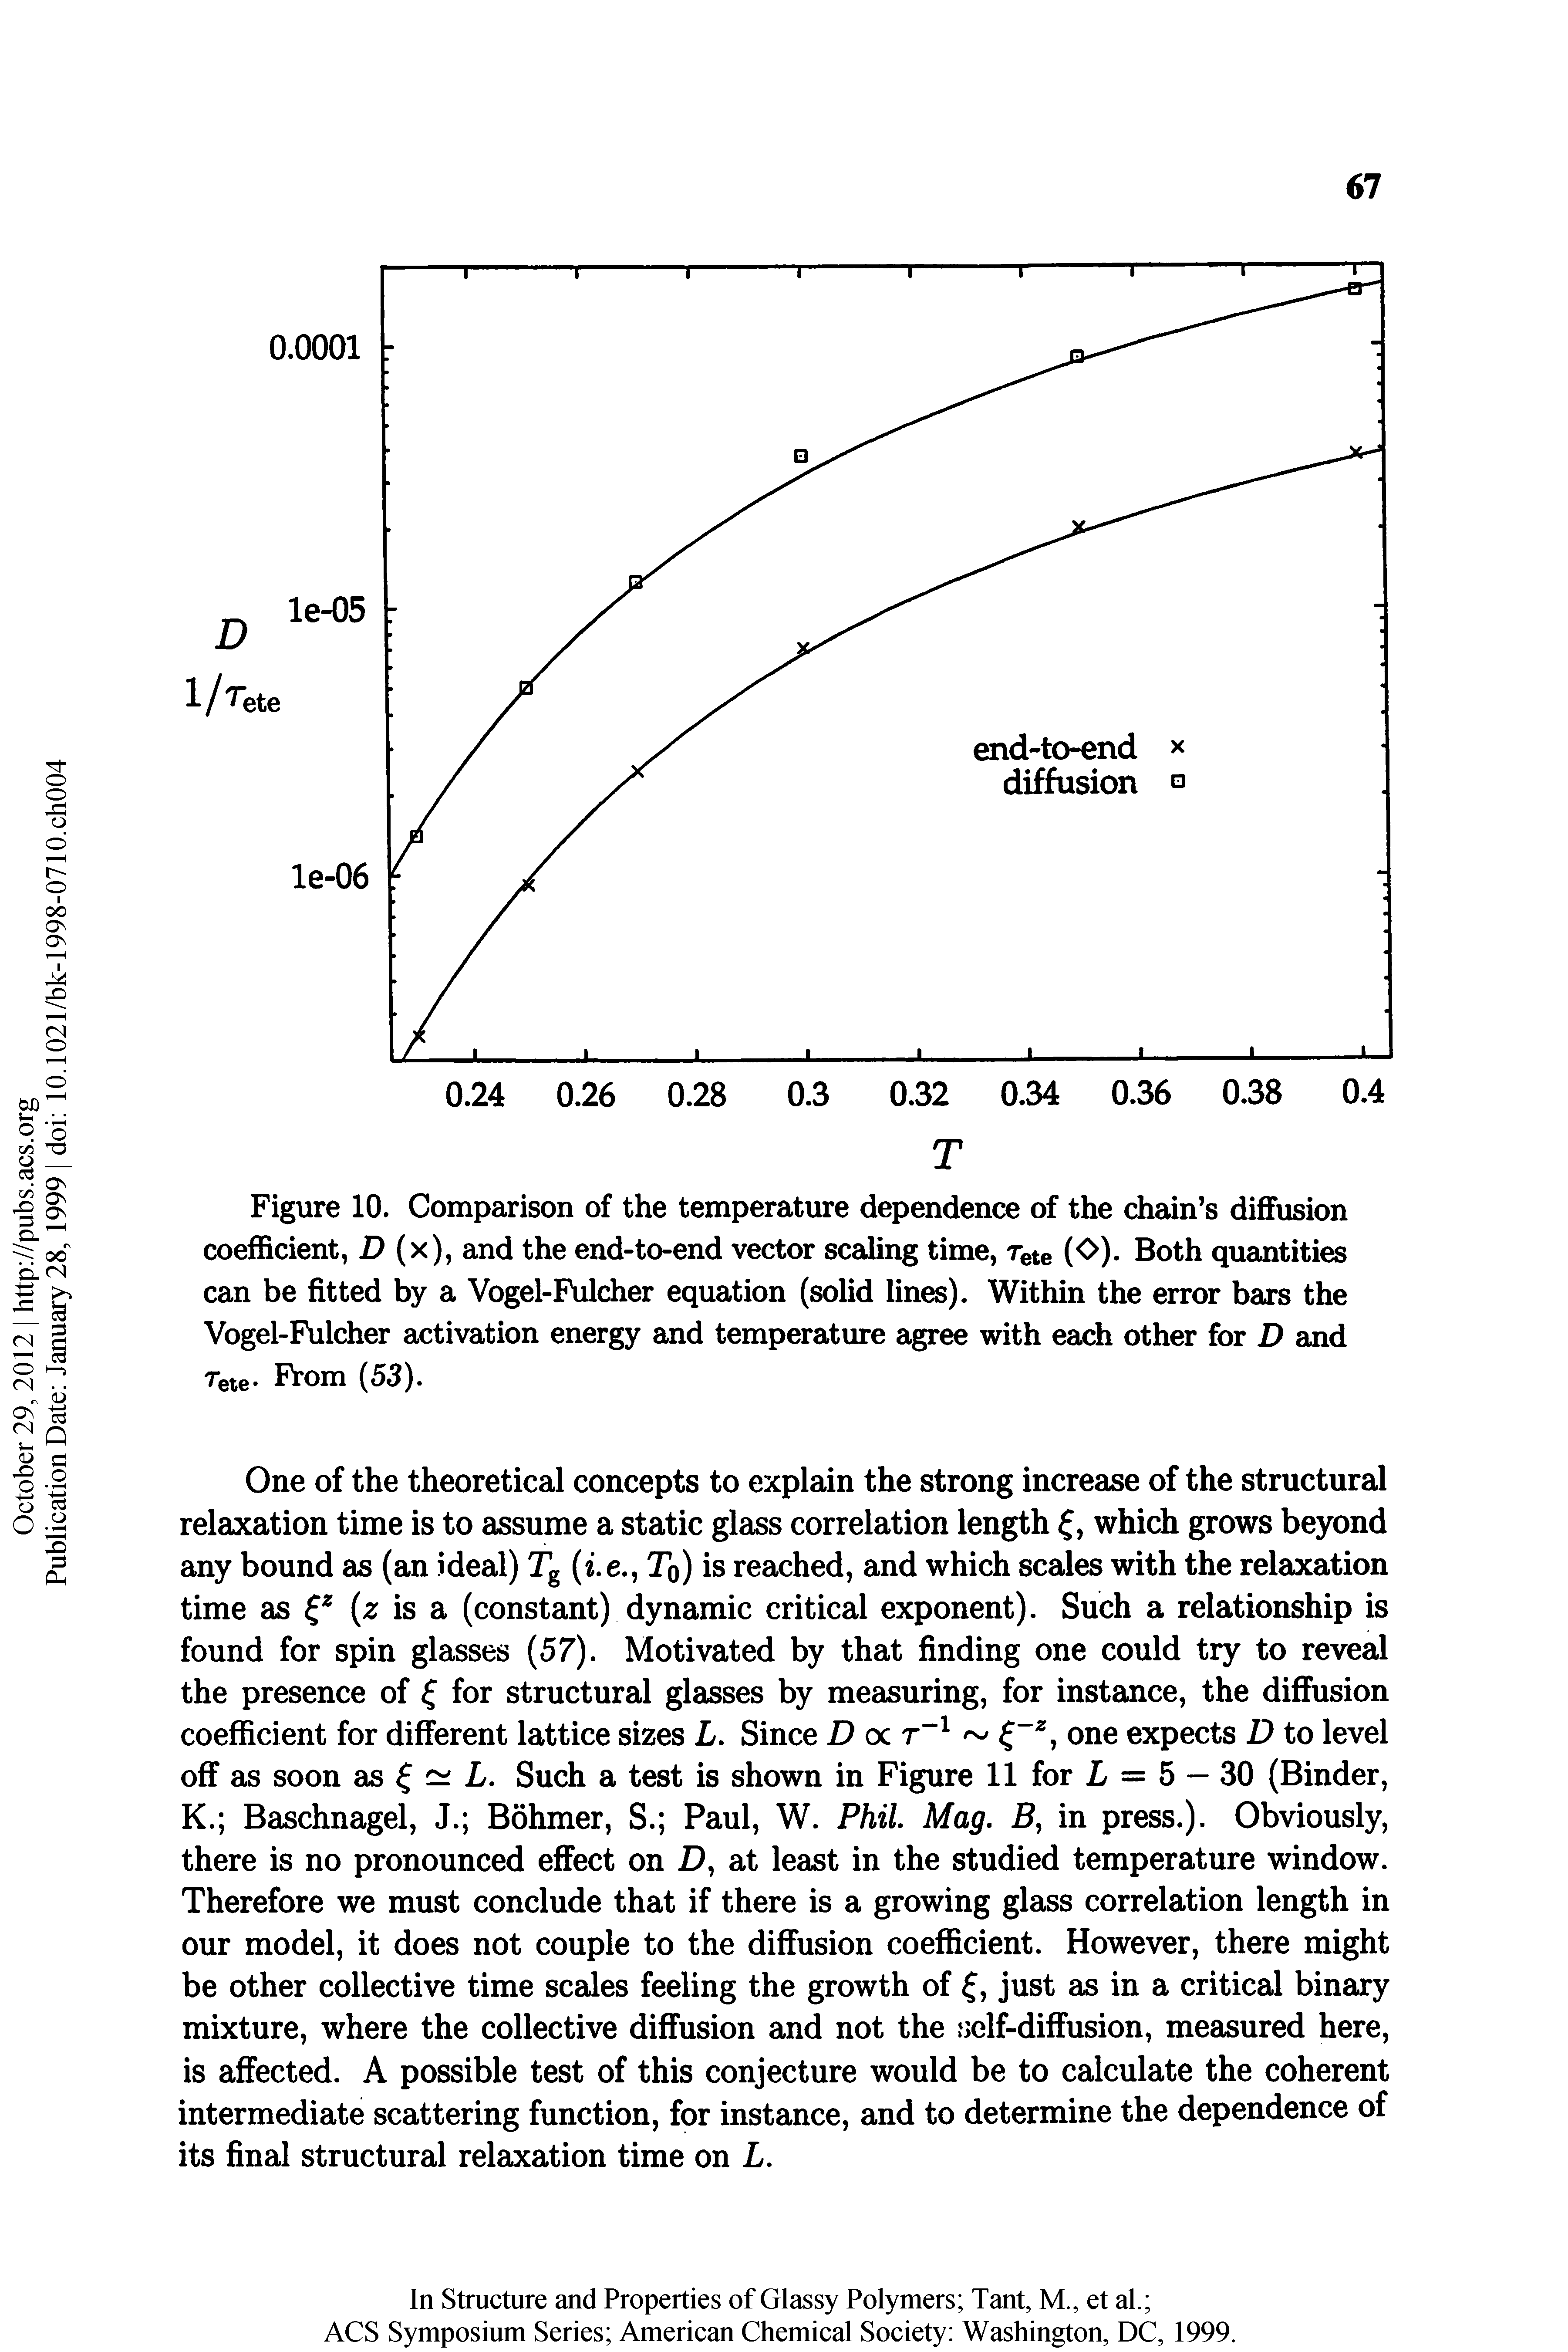 Figure 10. Comparison of the temperature dependence of the chain s diffusion coefficient, D x), and the end-to-end vector scaling time, Tete ( )- Both quantities can be fitted by a Vogel-Fulcher equation (solid lines). Within the error bars the Vogel-Fulcher activation energy and temperature agree with each other for D and Tete- From (53).